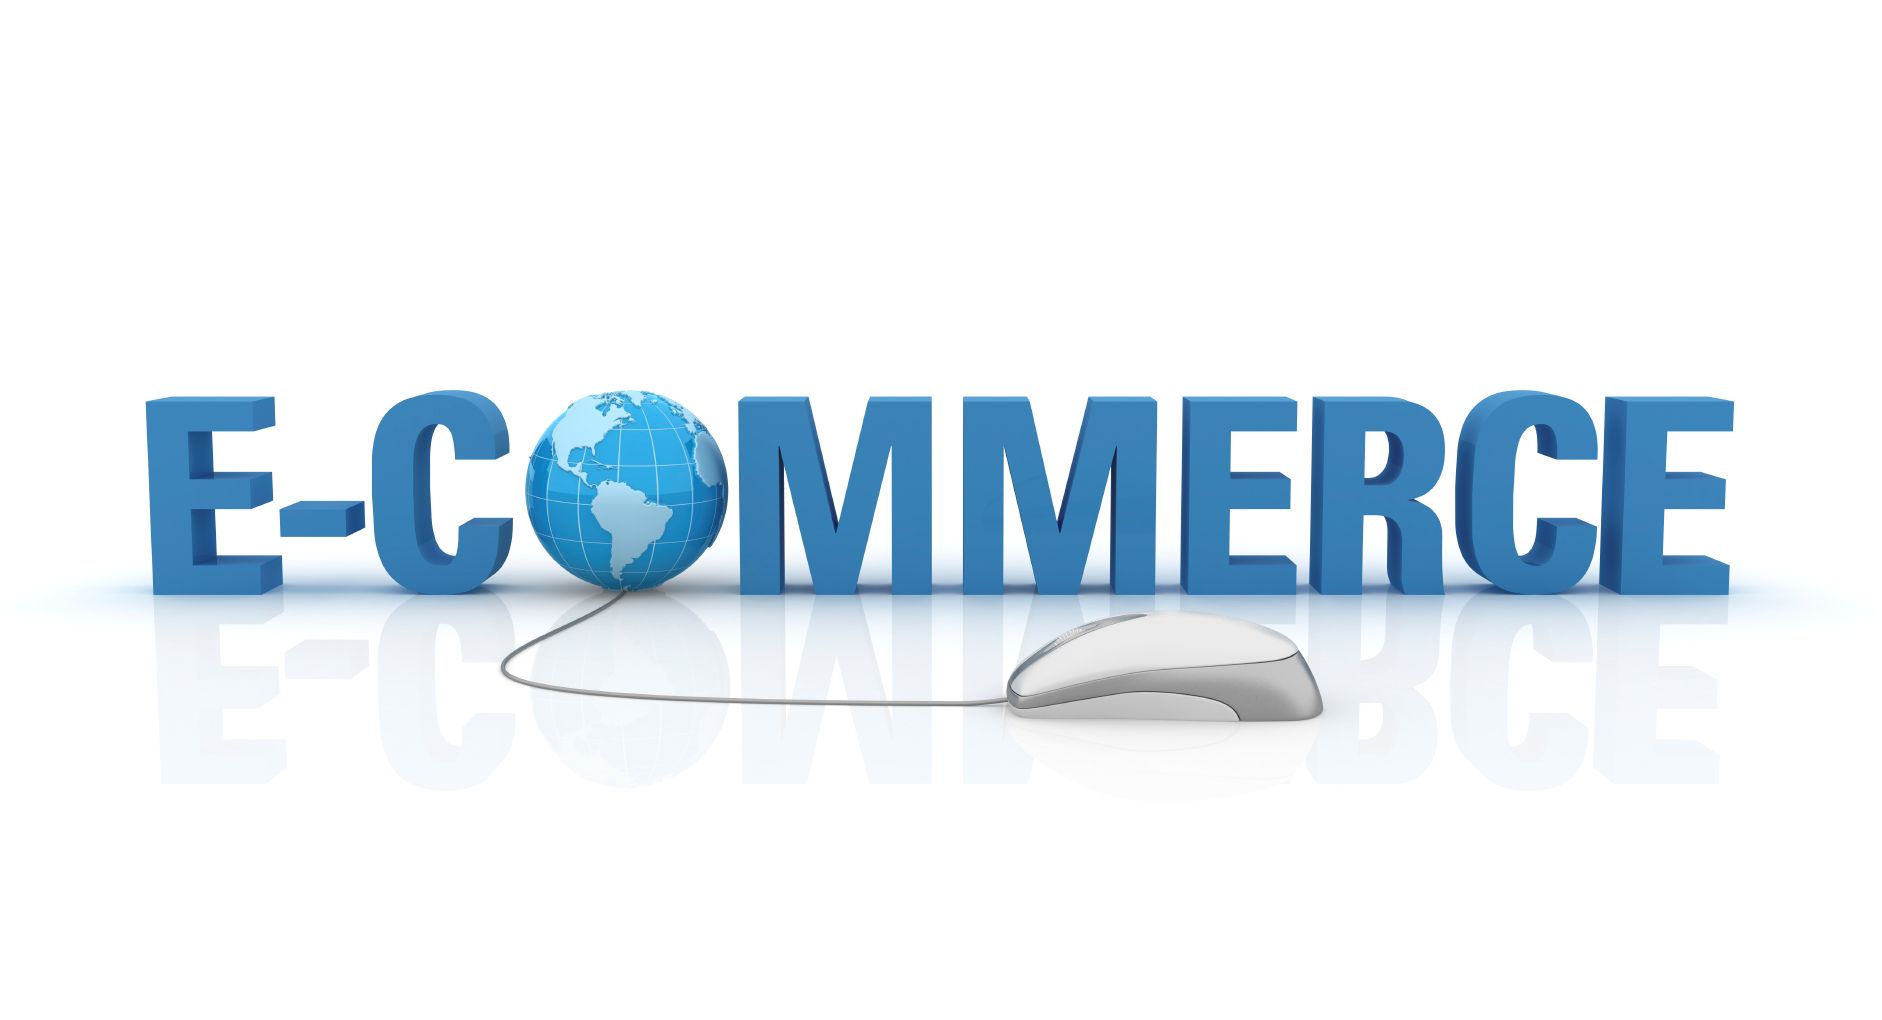 HOW TO MAKE YOUR AVERAGE ECOMMERCE WEBSITE INTO A SUCCESSFUL ONE